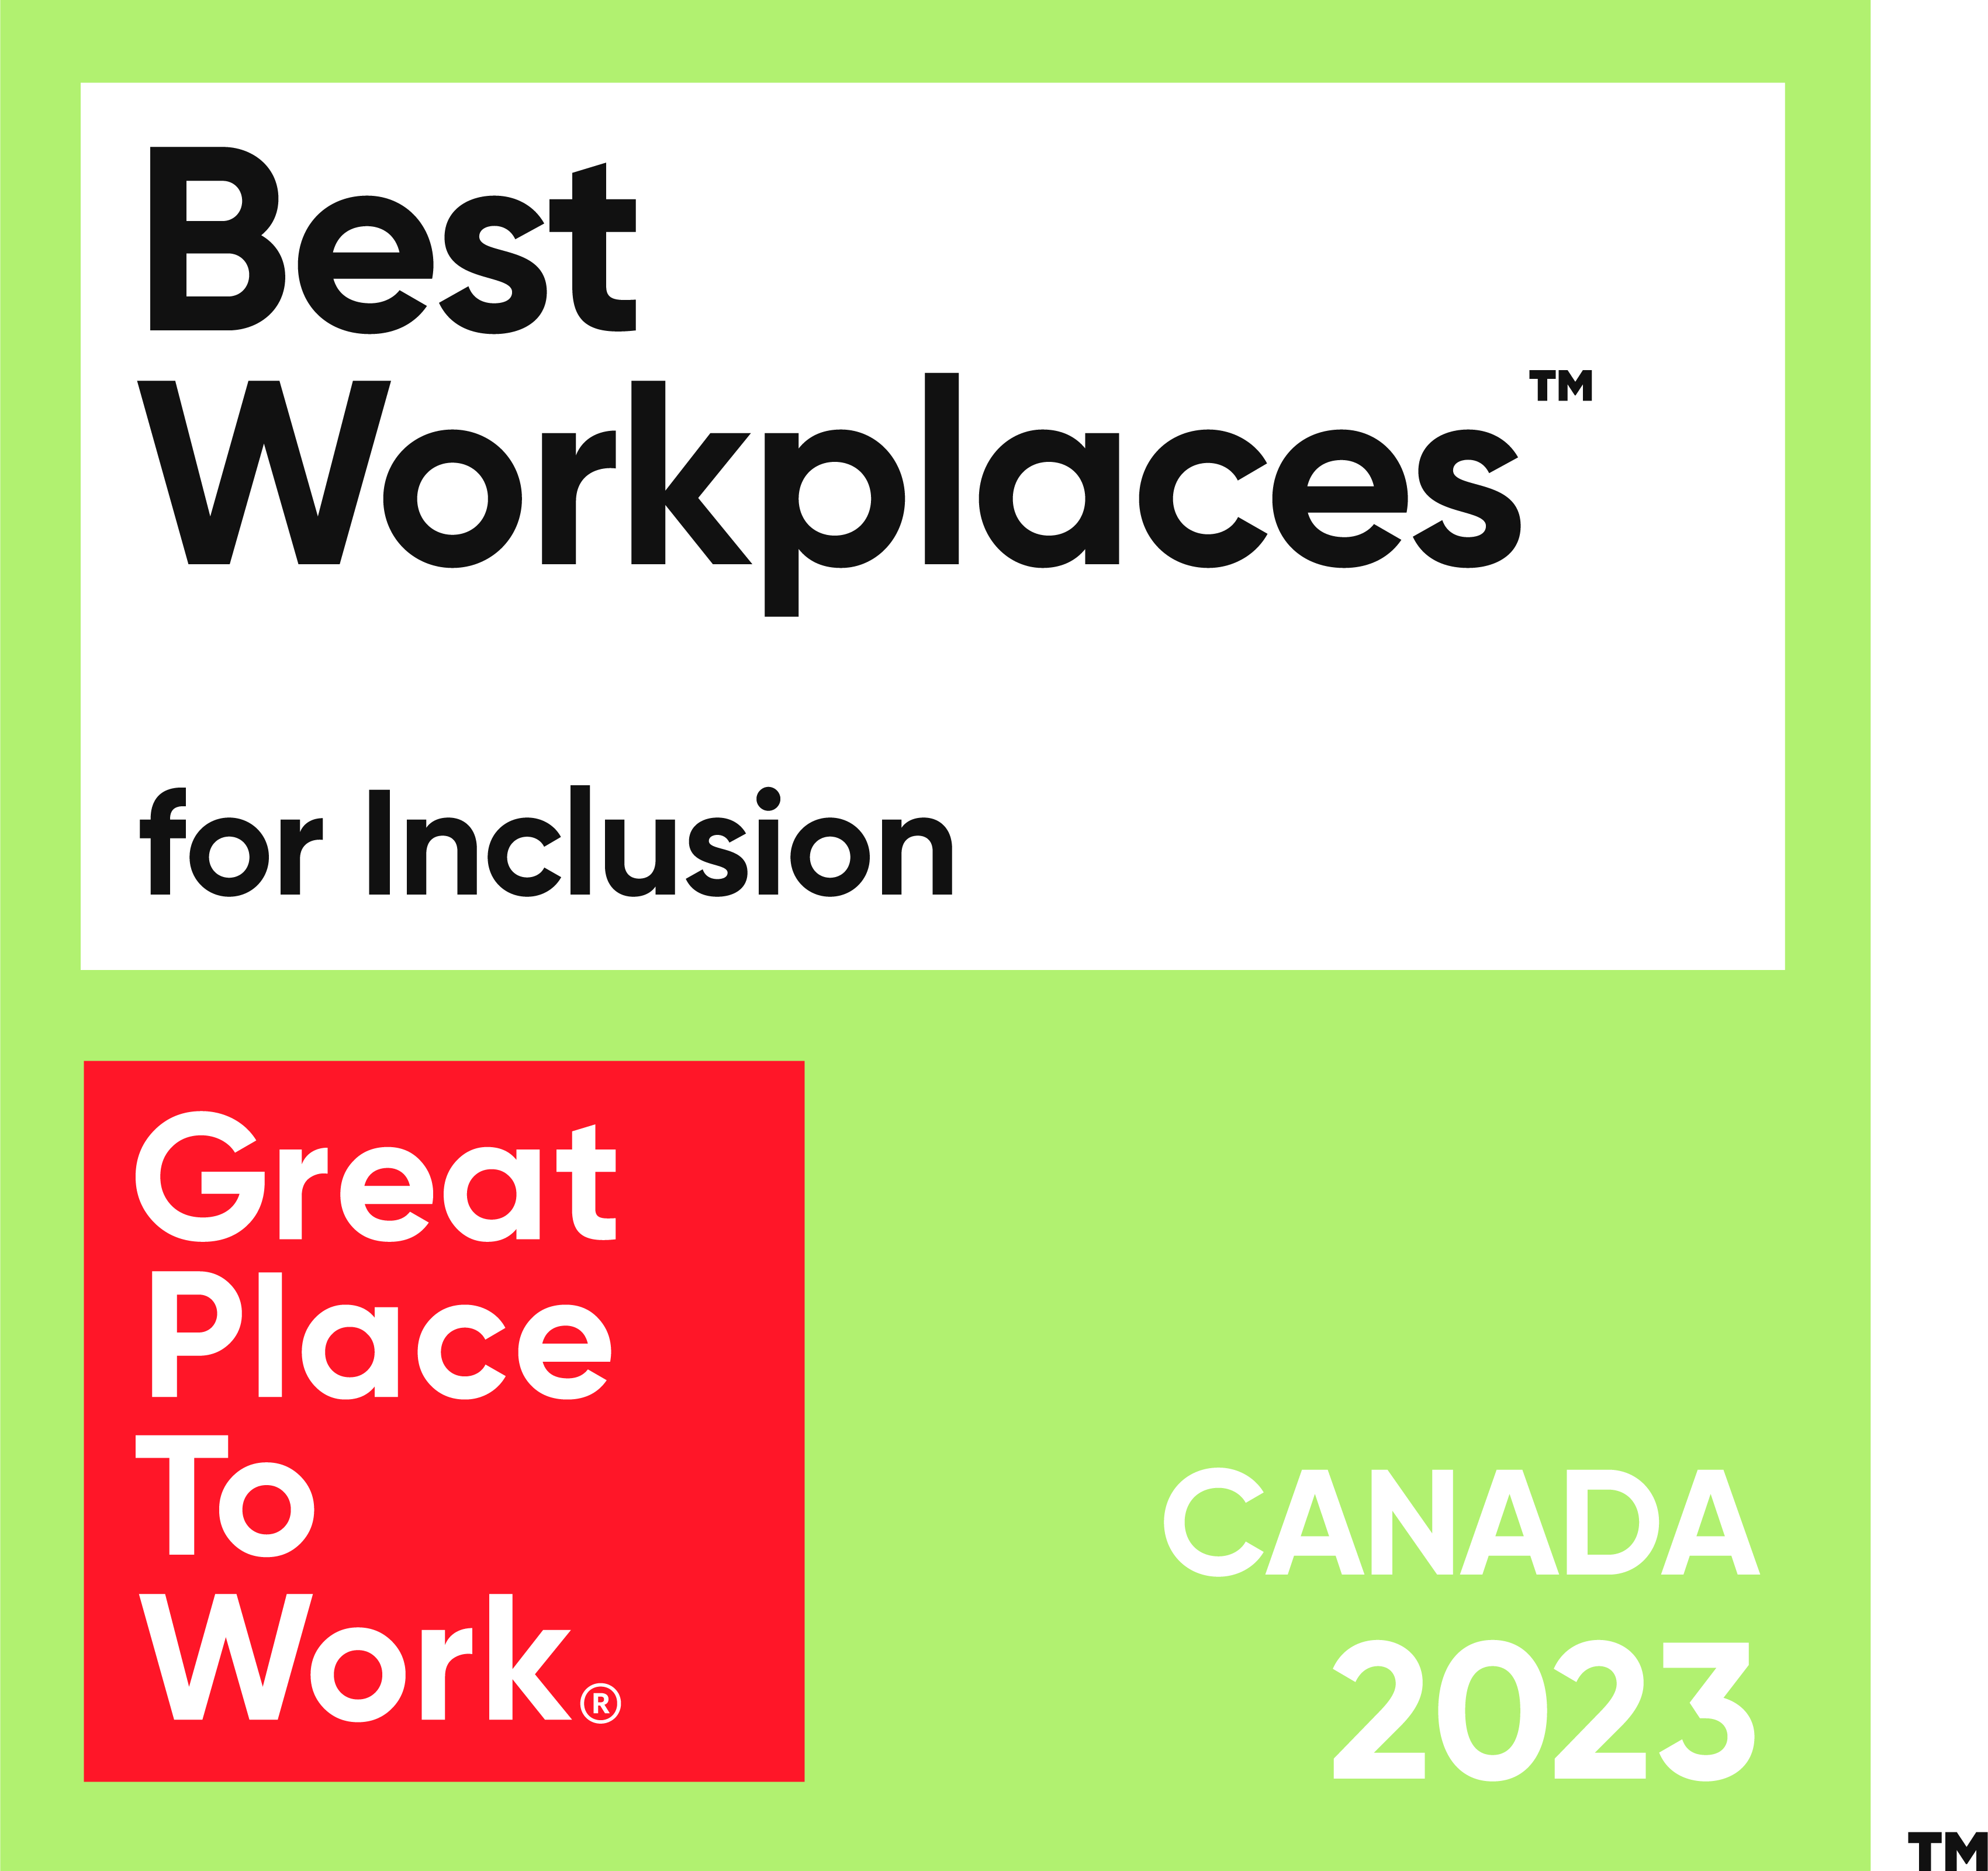 Best Workplaces for Inclusion. Great Place To Work. Canada 2023